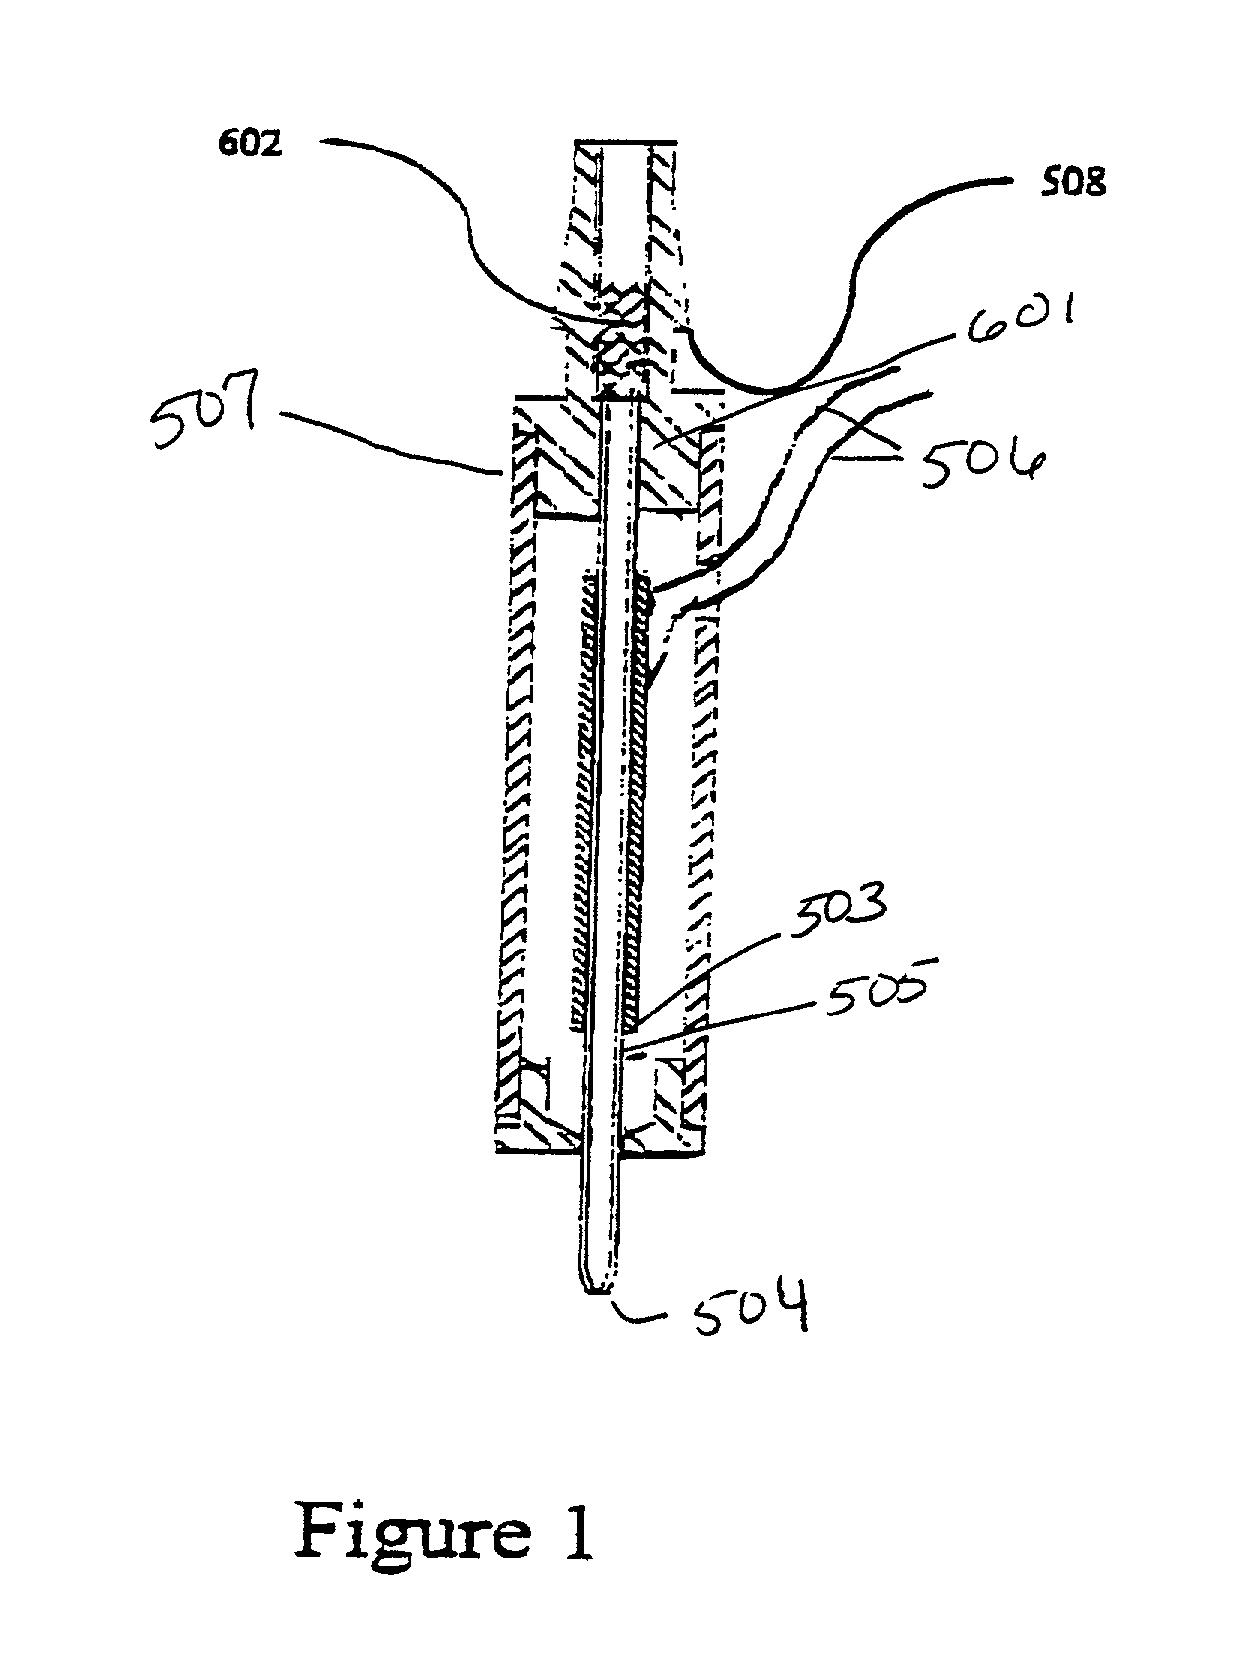 Apparatus and methods for high resolution separation and analysis of compounds